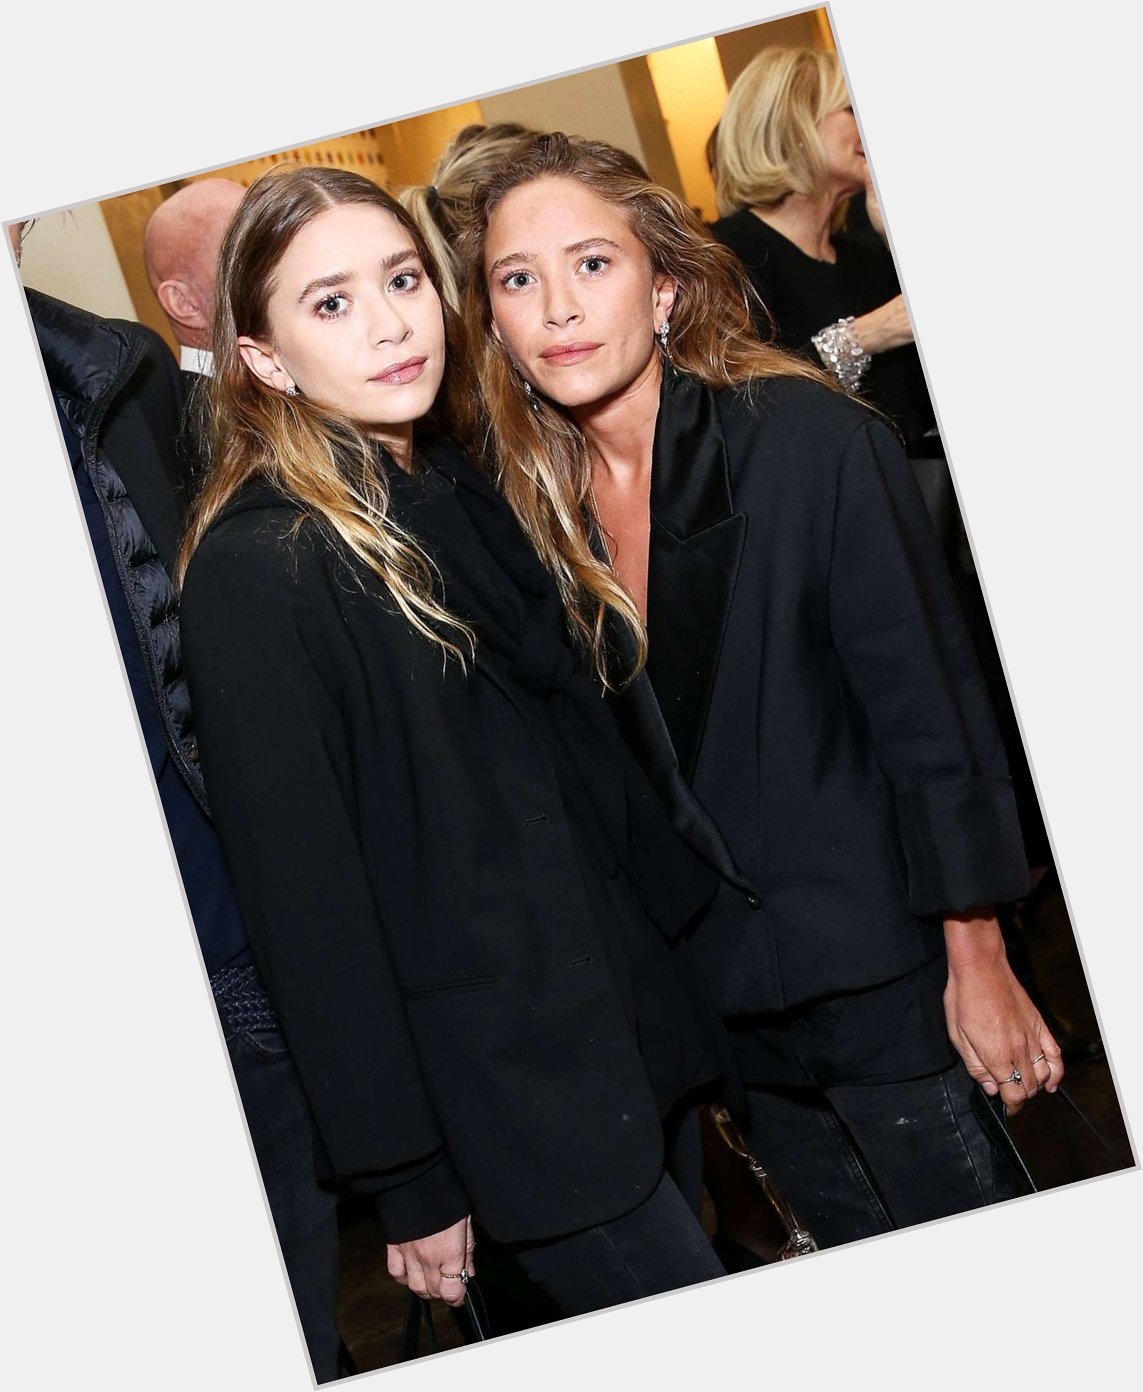 HAPPY BIRTHDAY TO MY QUEENS MARY-KATE AND ASHLEY OLSEN I LOVE Y ALL SO MUCH 